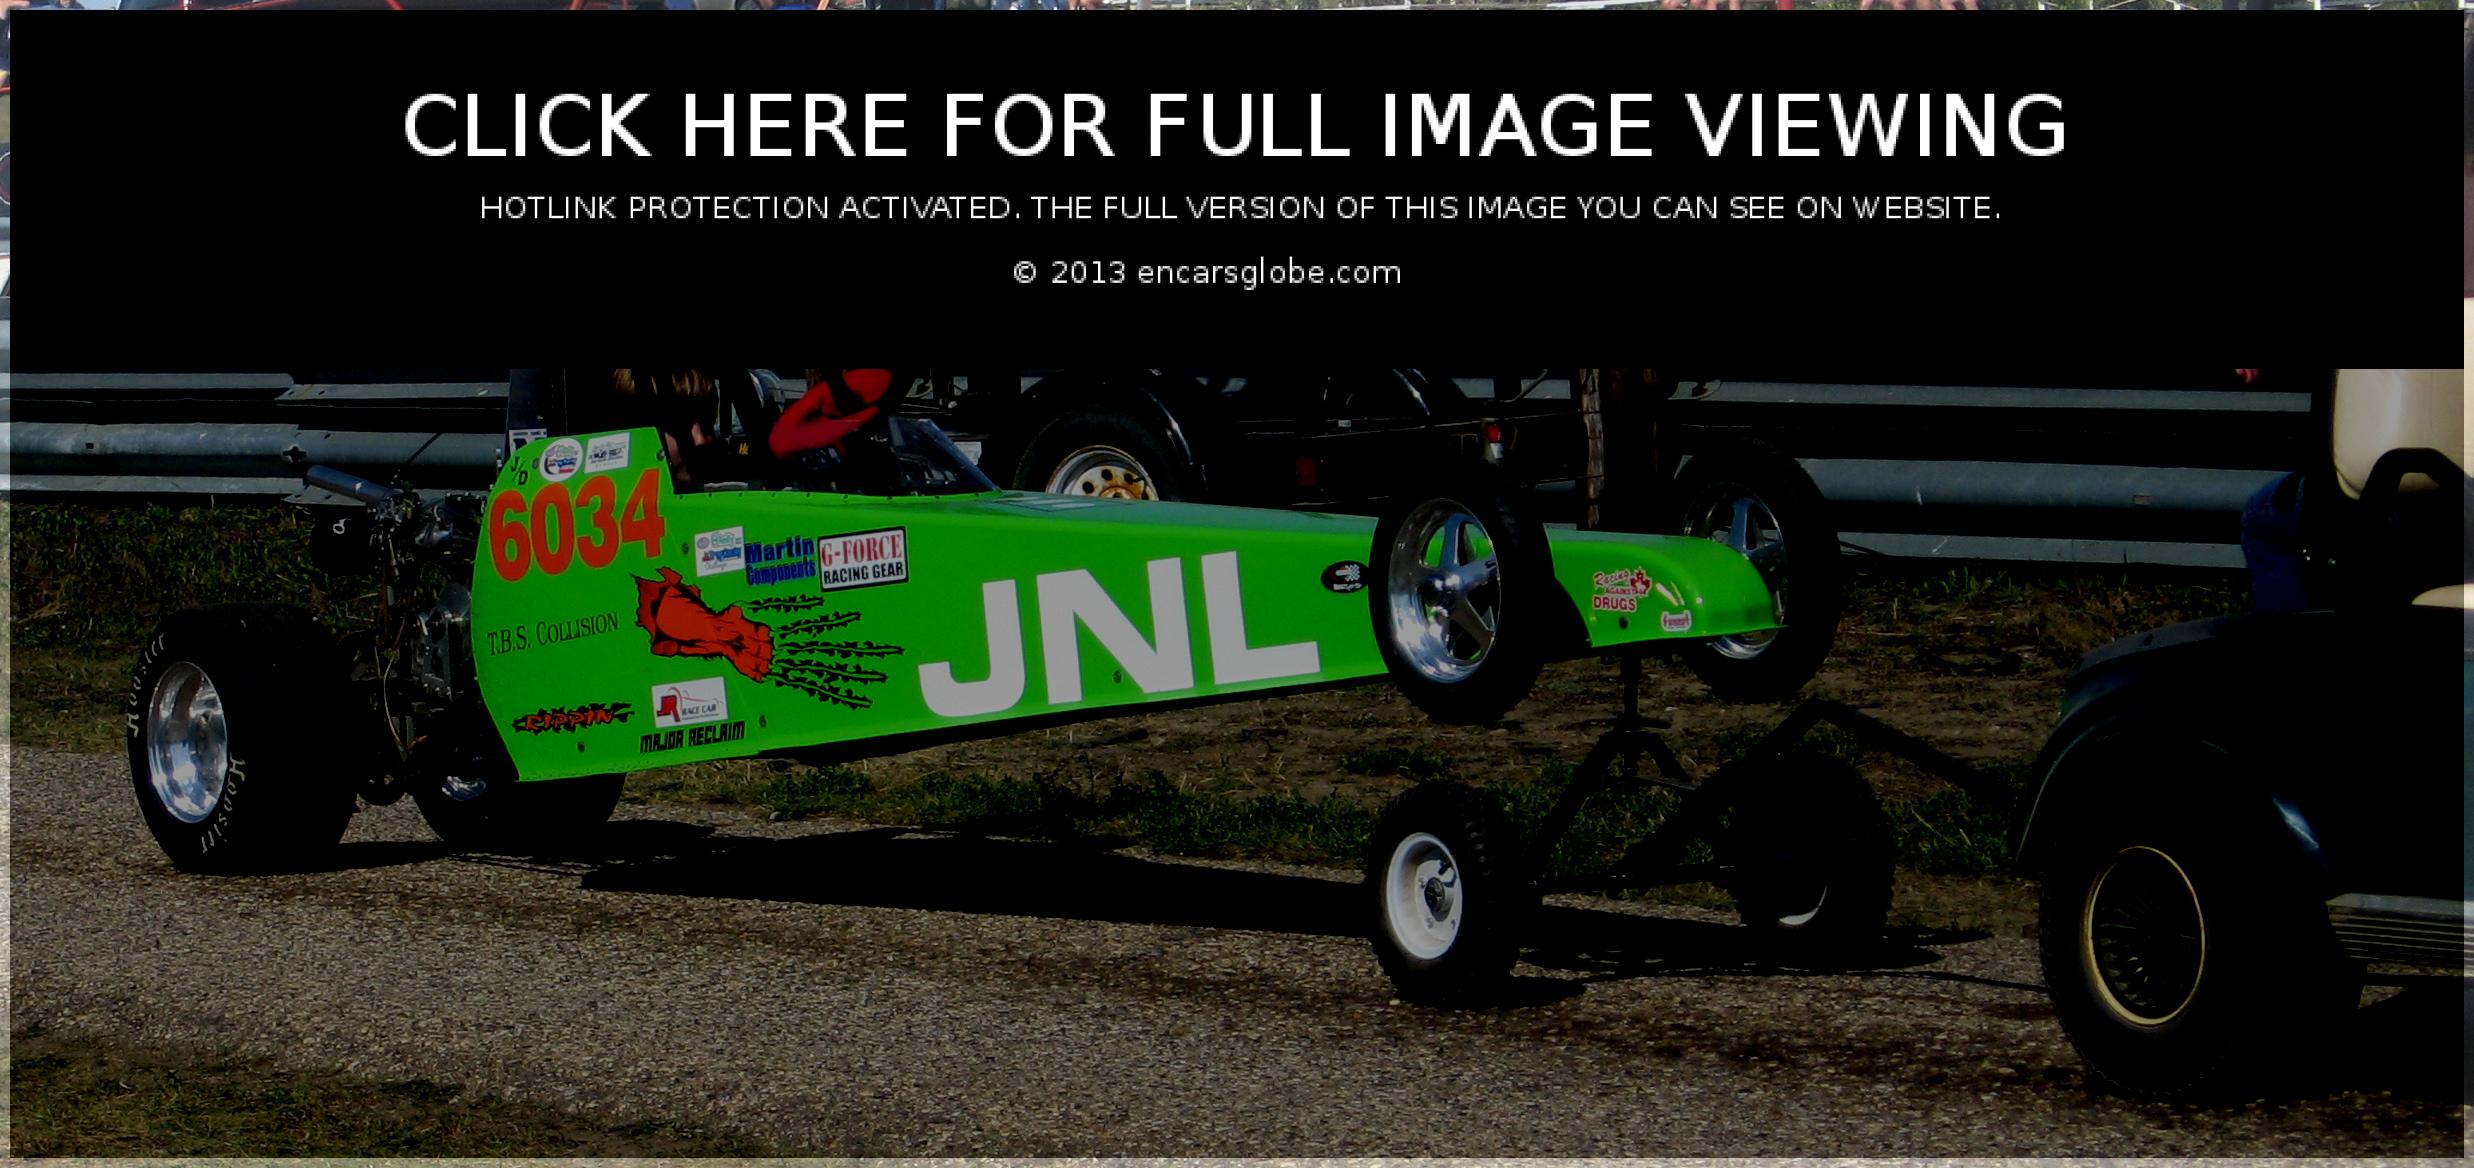 Dragster Jet dragster Photo Gallery: Photo #03 out of 8, Image ...